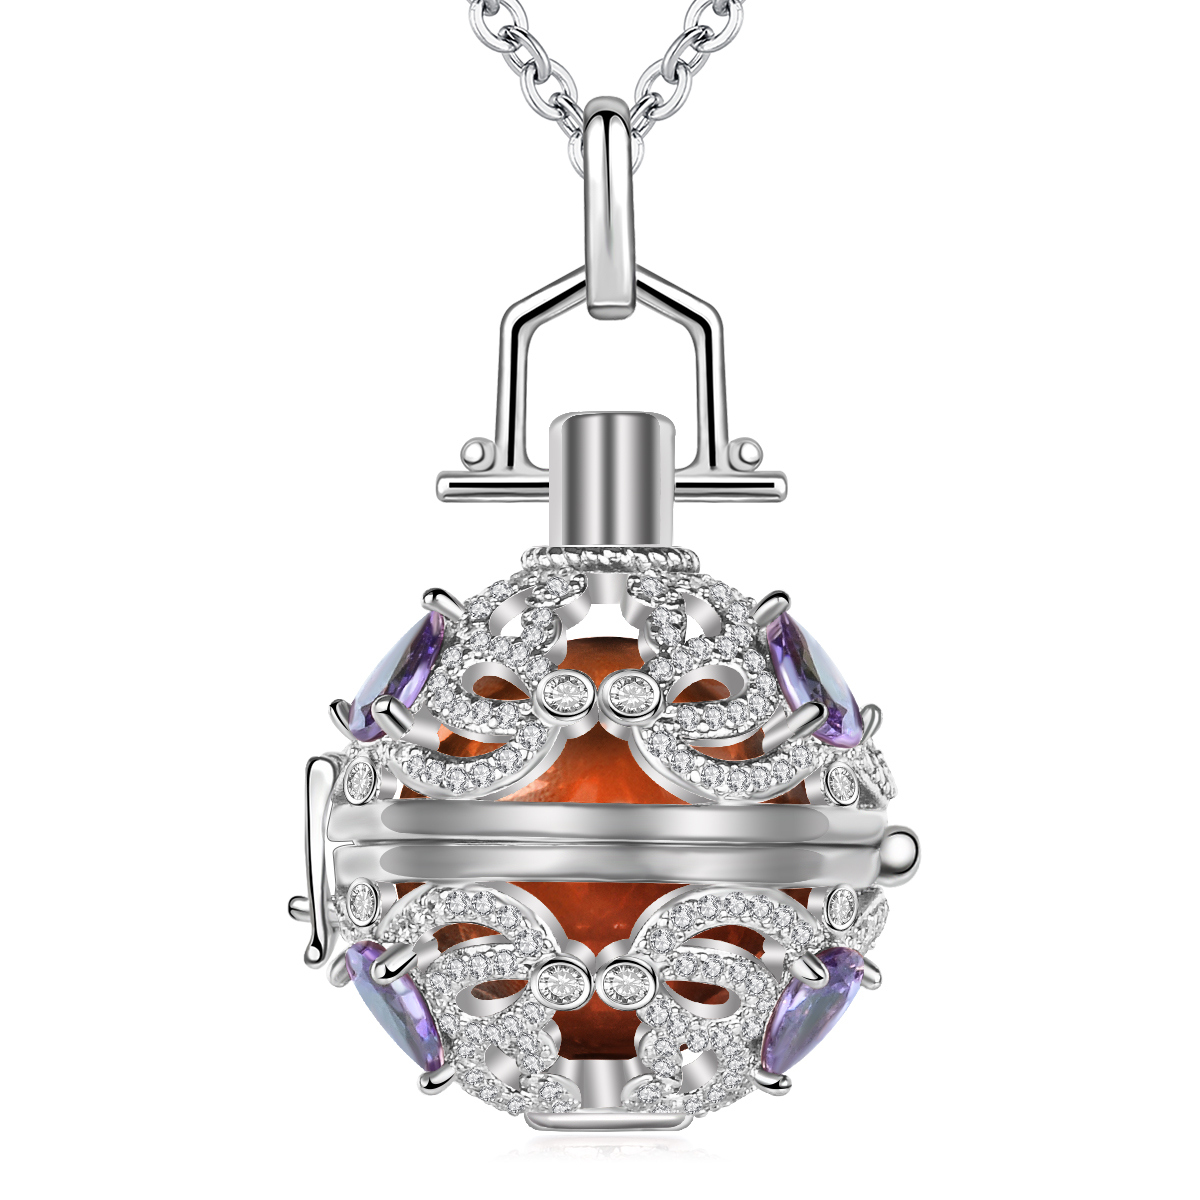 Platinum Plated Encrusted Amethyst Luxury Jewelry Mexico Pregnancy Chime Music Angel Ball Caller Locket Necklace